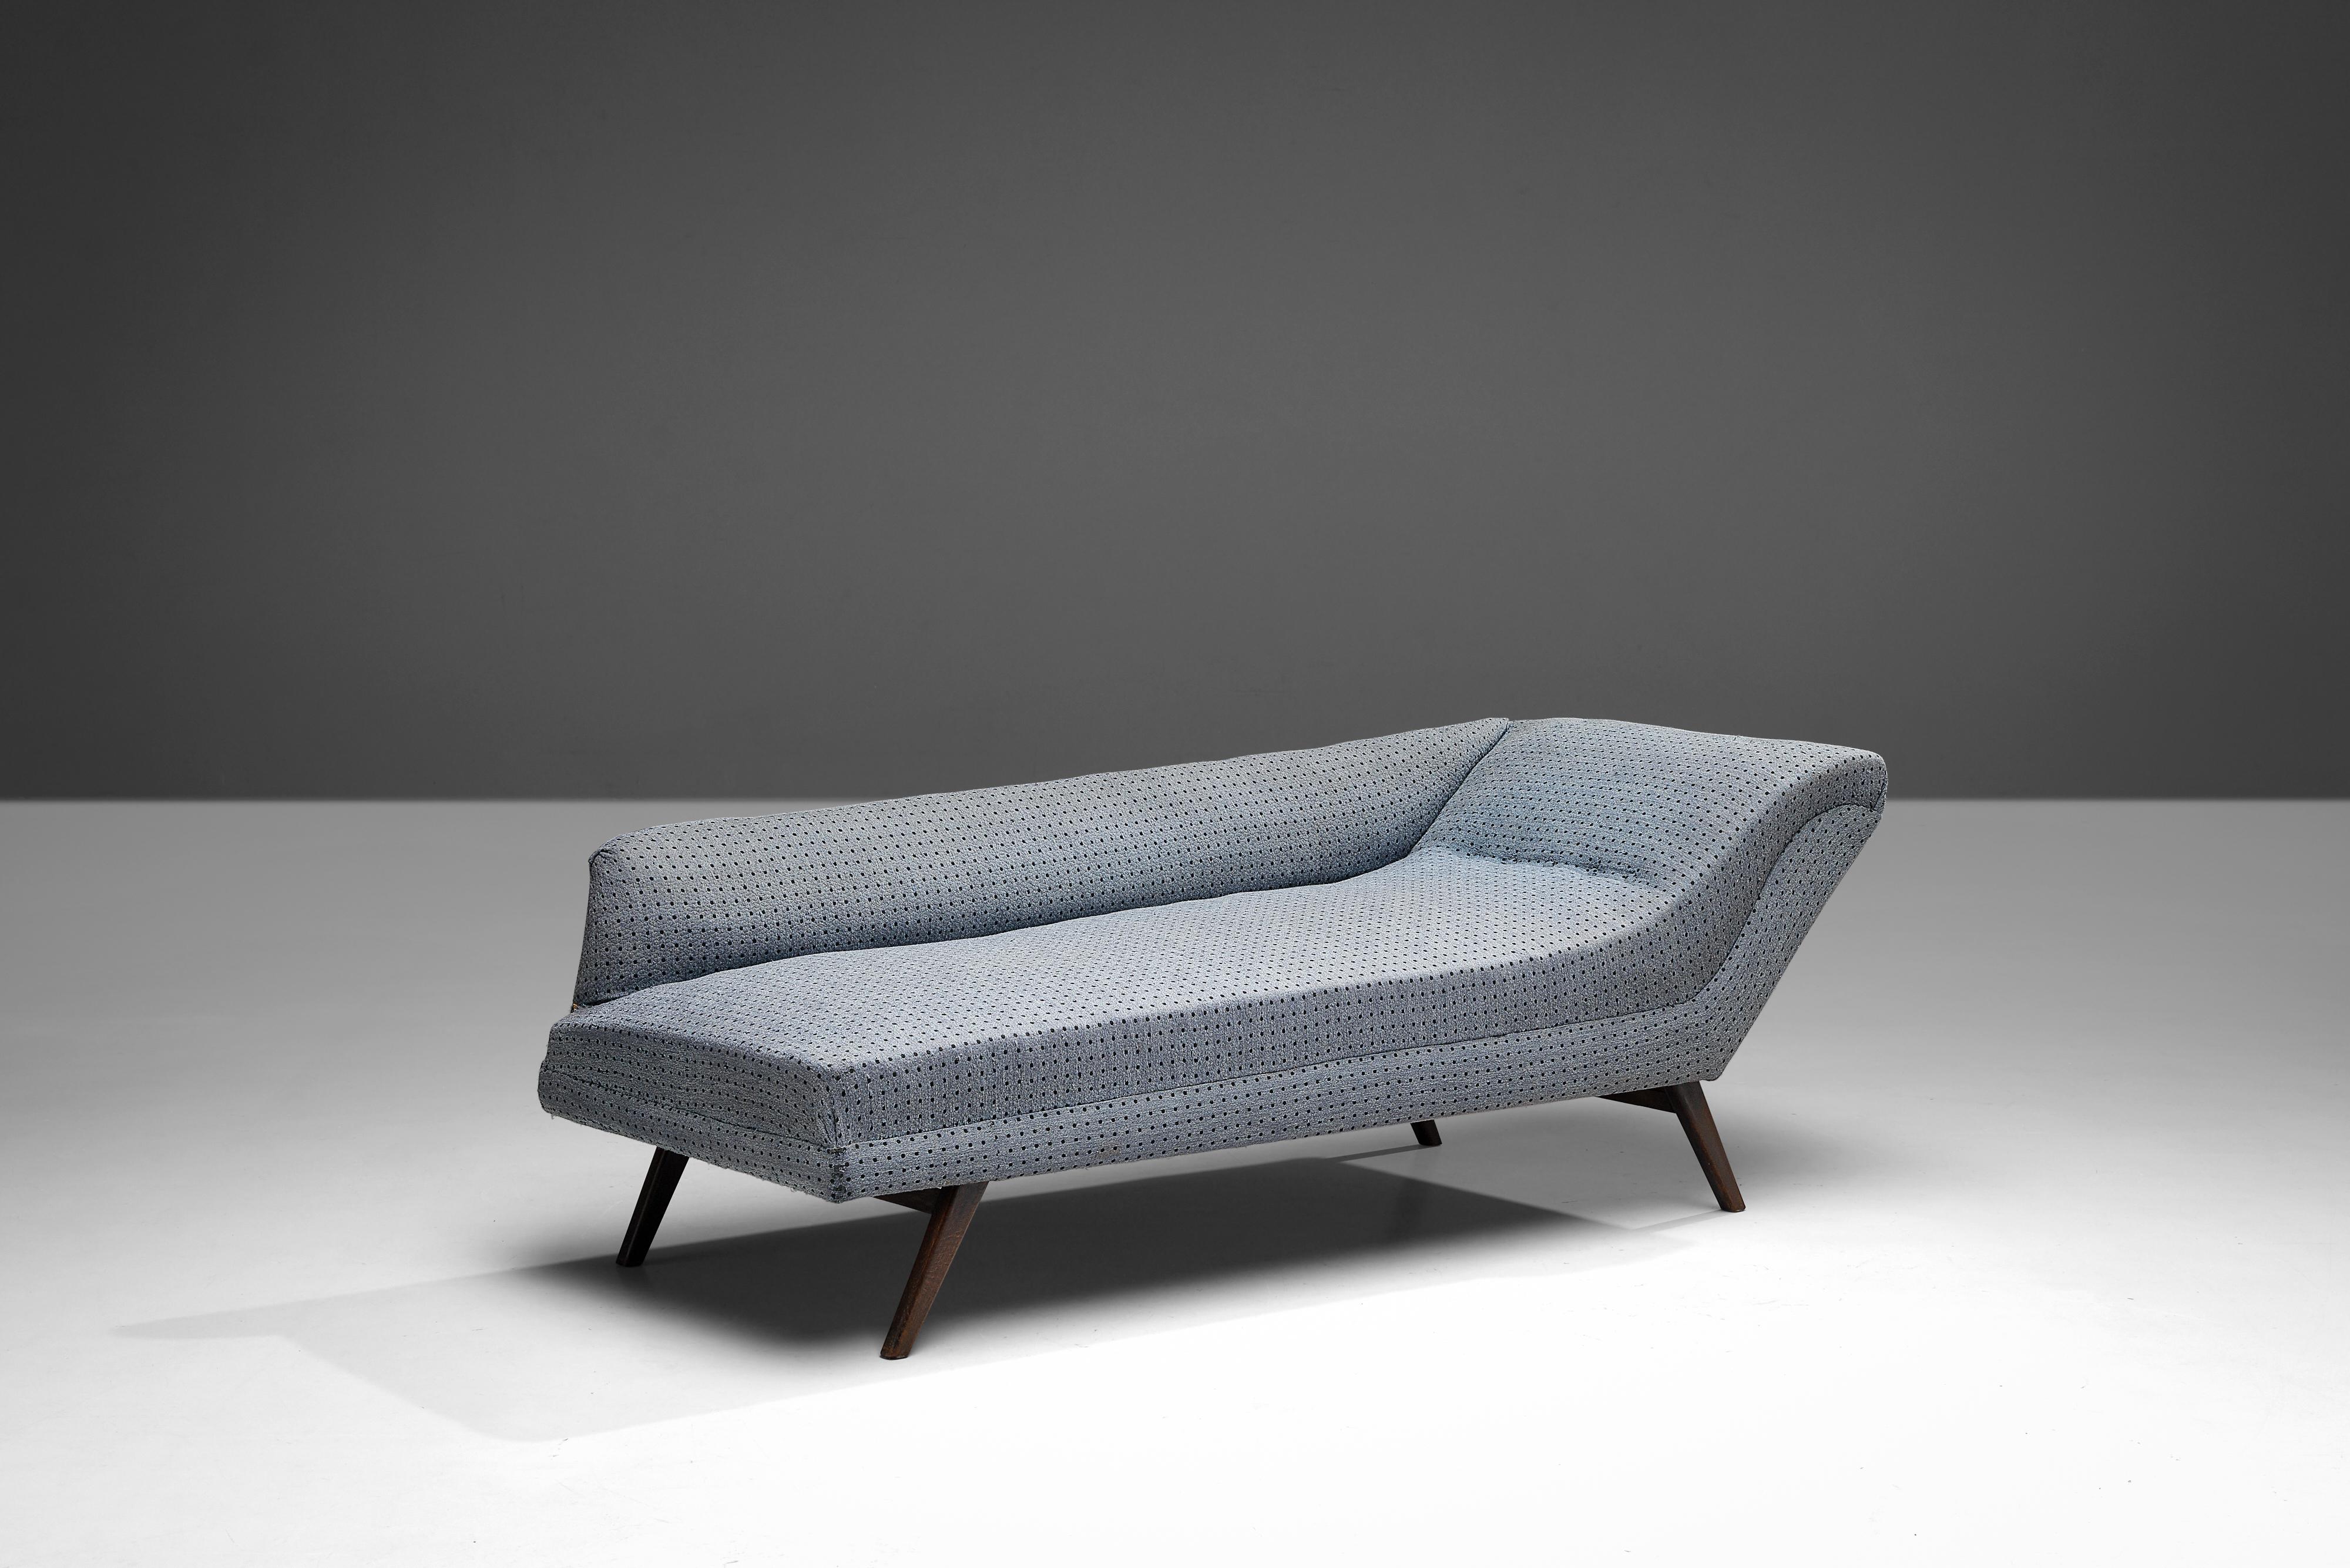 Chaise Longue, beech, upholstery, Denmark, 1960s

The frame of this stunning chaise longue illustrates a solid construction of clear lines and round edges. Yet the upholstery has little black dots placed evenly next to each other, giving this